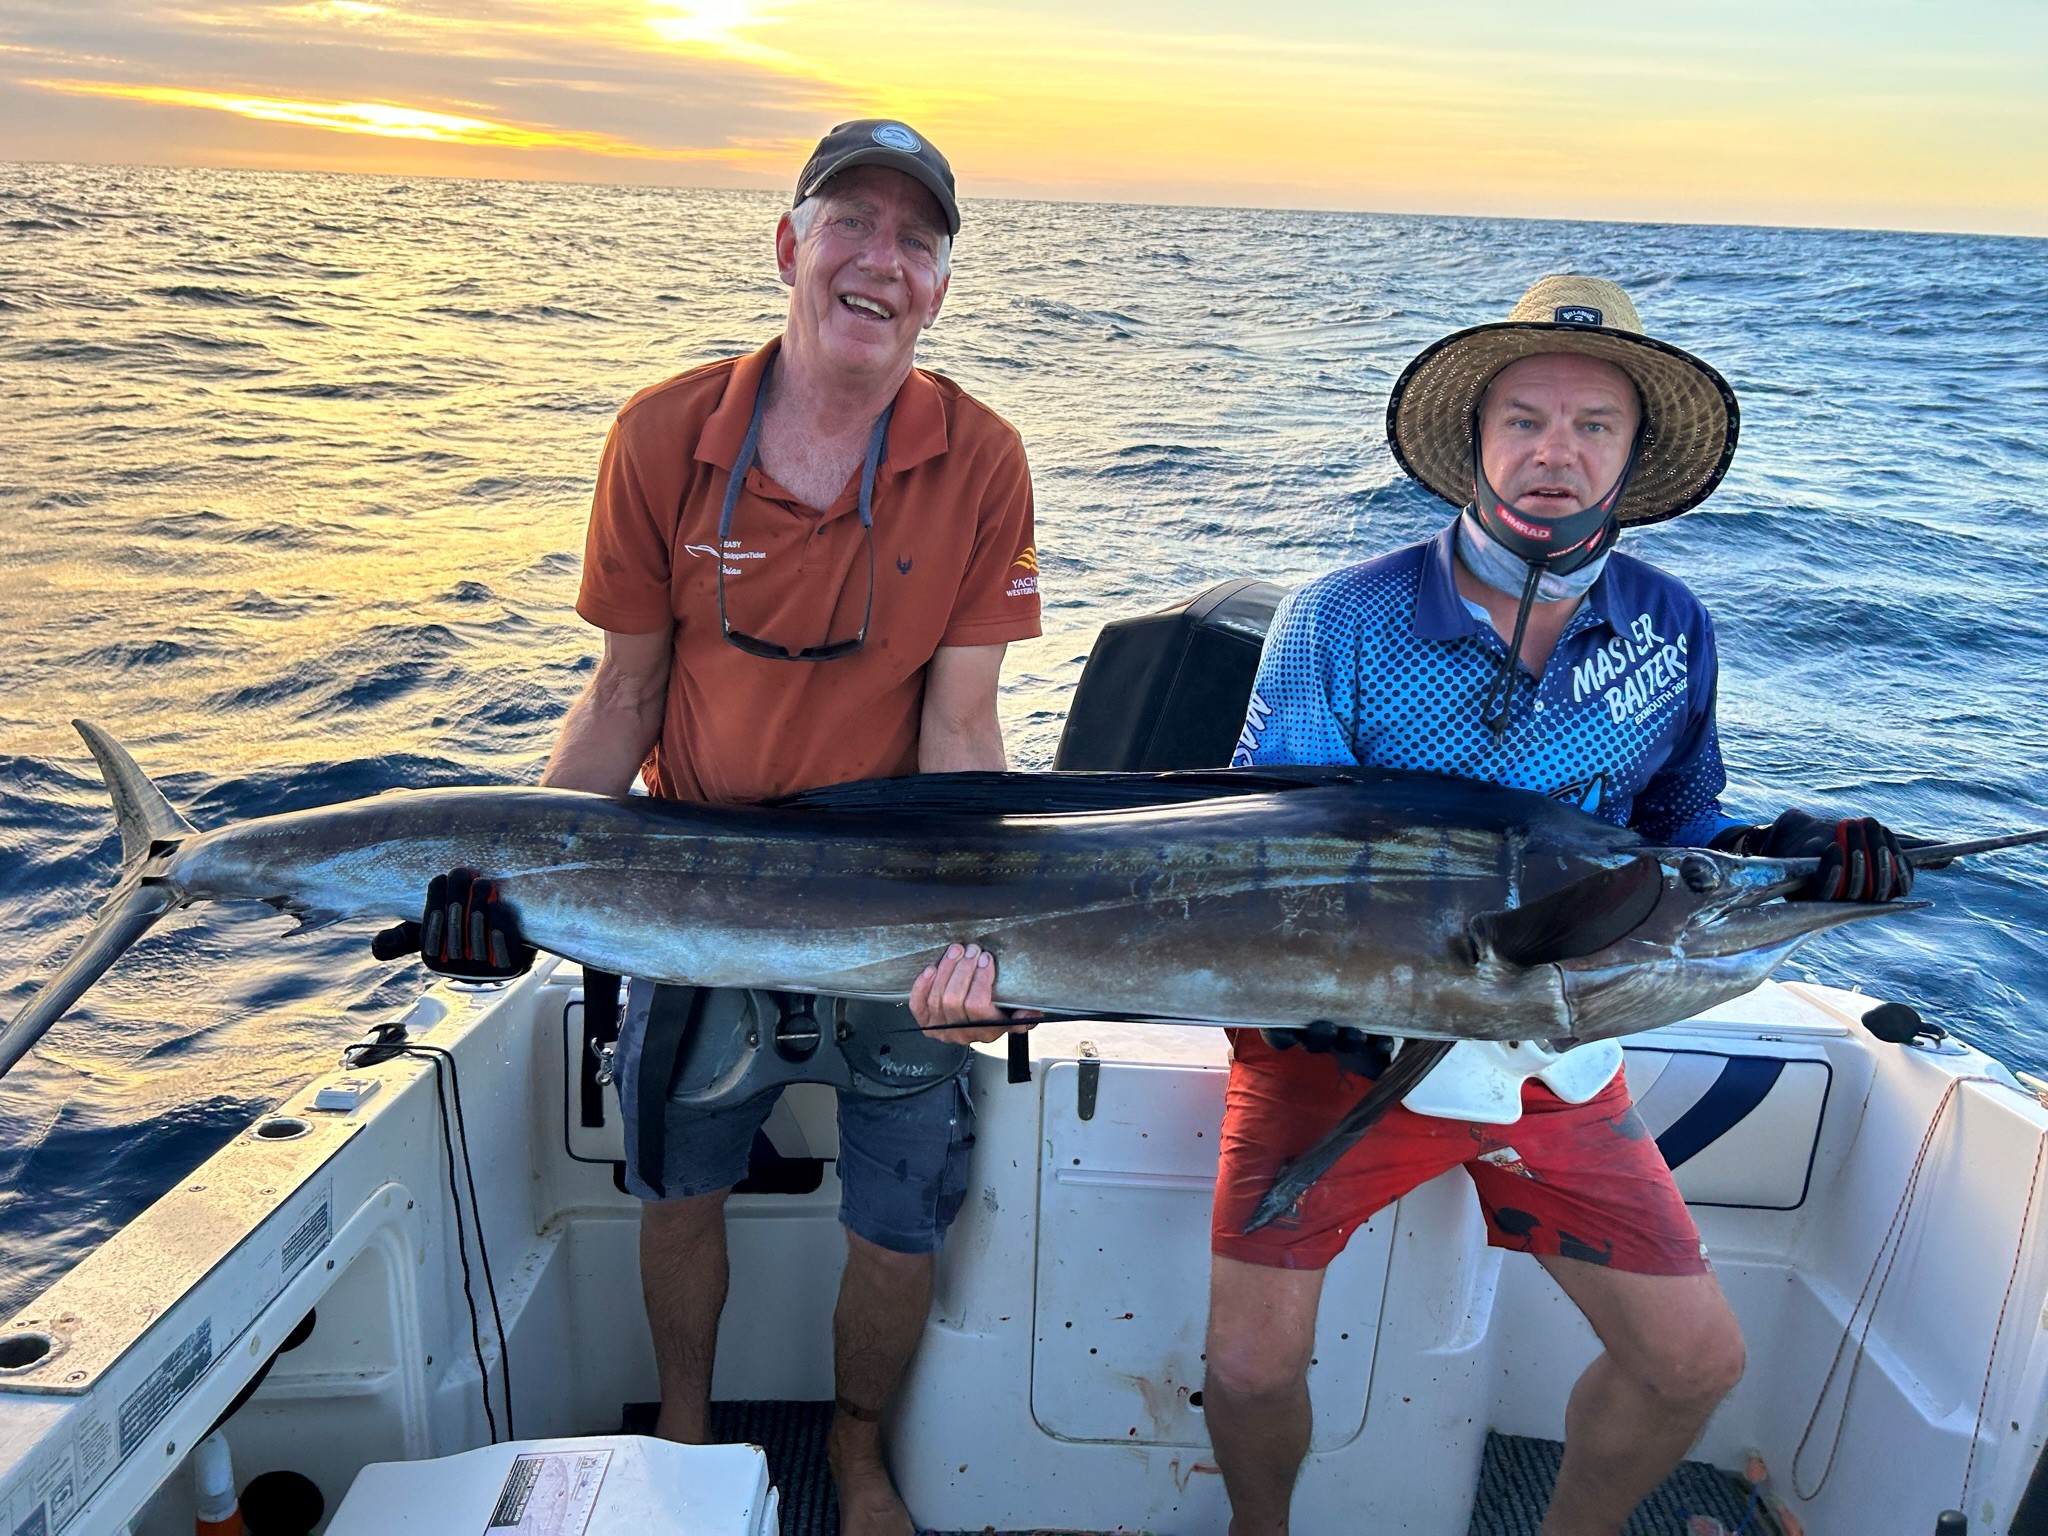 Two men holding large marlin freshly caught on fishing trip.